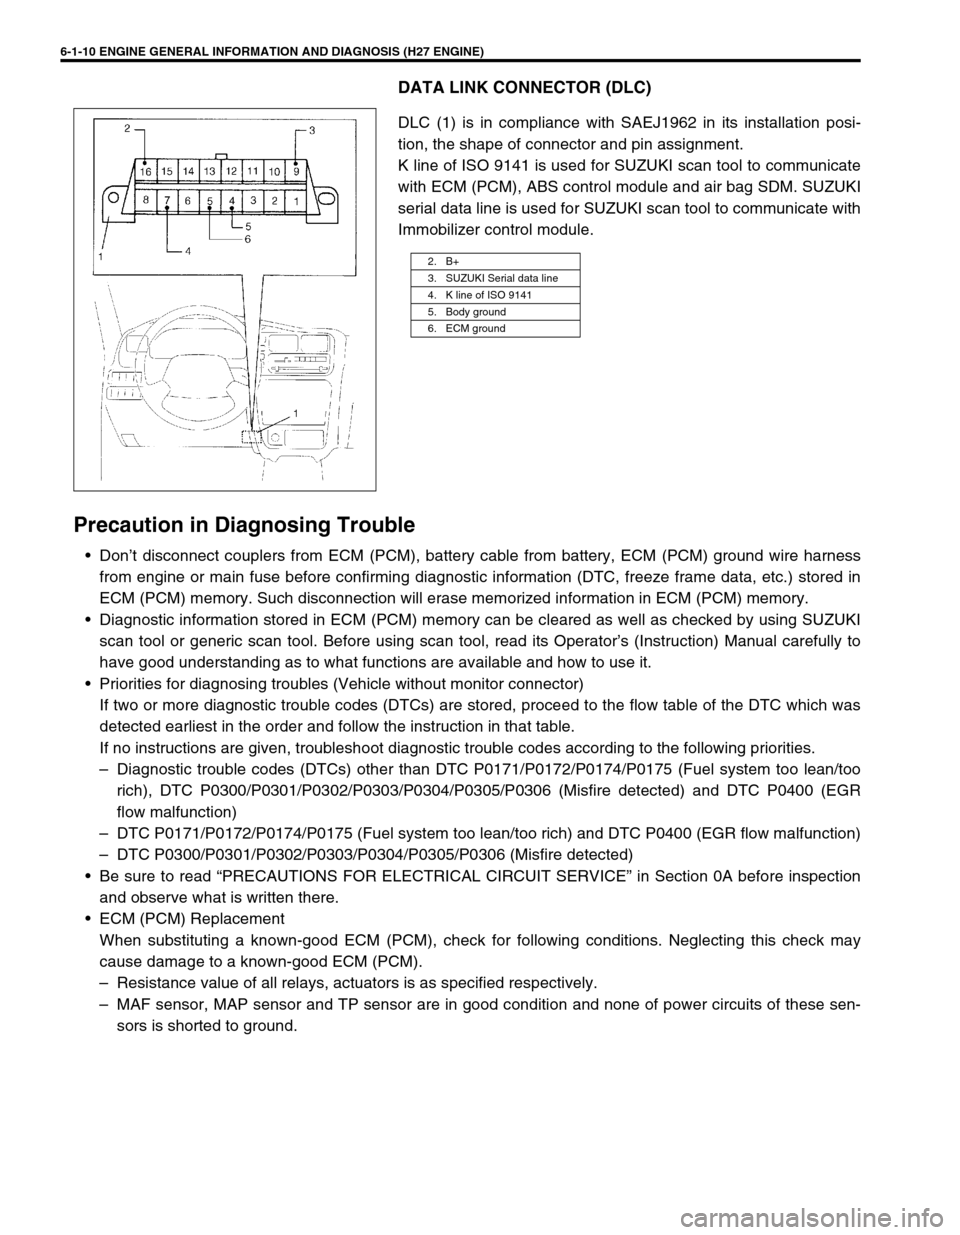 SUZUKI GRAND VITARA 1999 2.G Service Manual 6-1-10 ENGINE GENERAL INFORMATION AND DIAGNOSIS (H27 ENGINE)
DATA LINK CONNECTOR (DLC)
DLC (1) is in compliance with SAEJ1962 in its installation posi-
tion, the shape of connector and pin assignment.